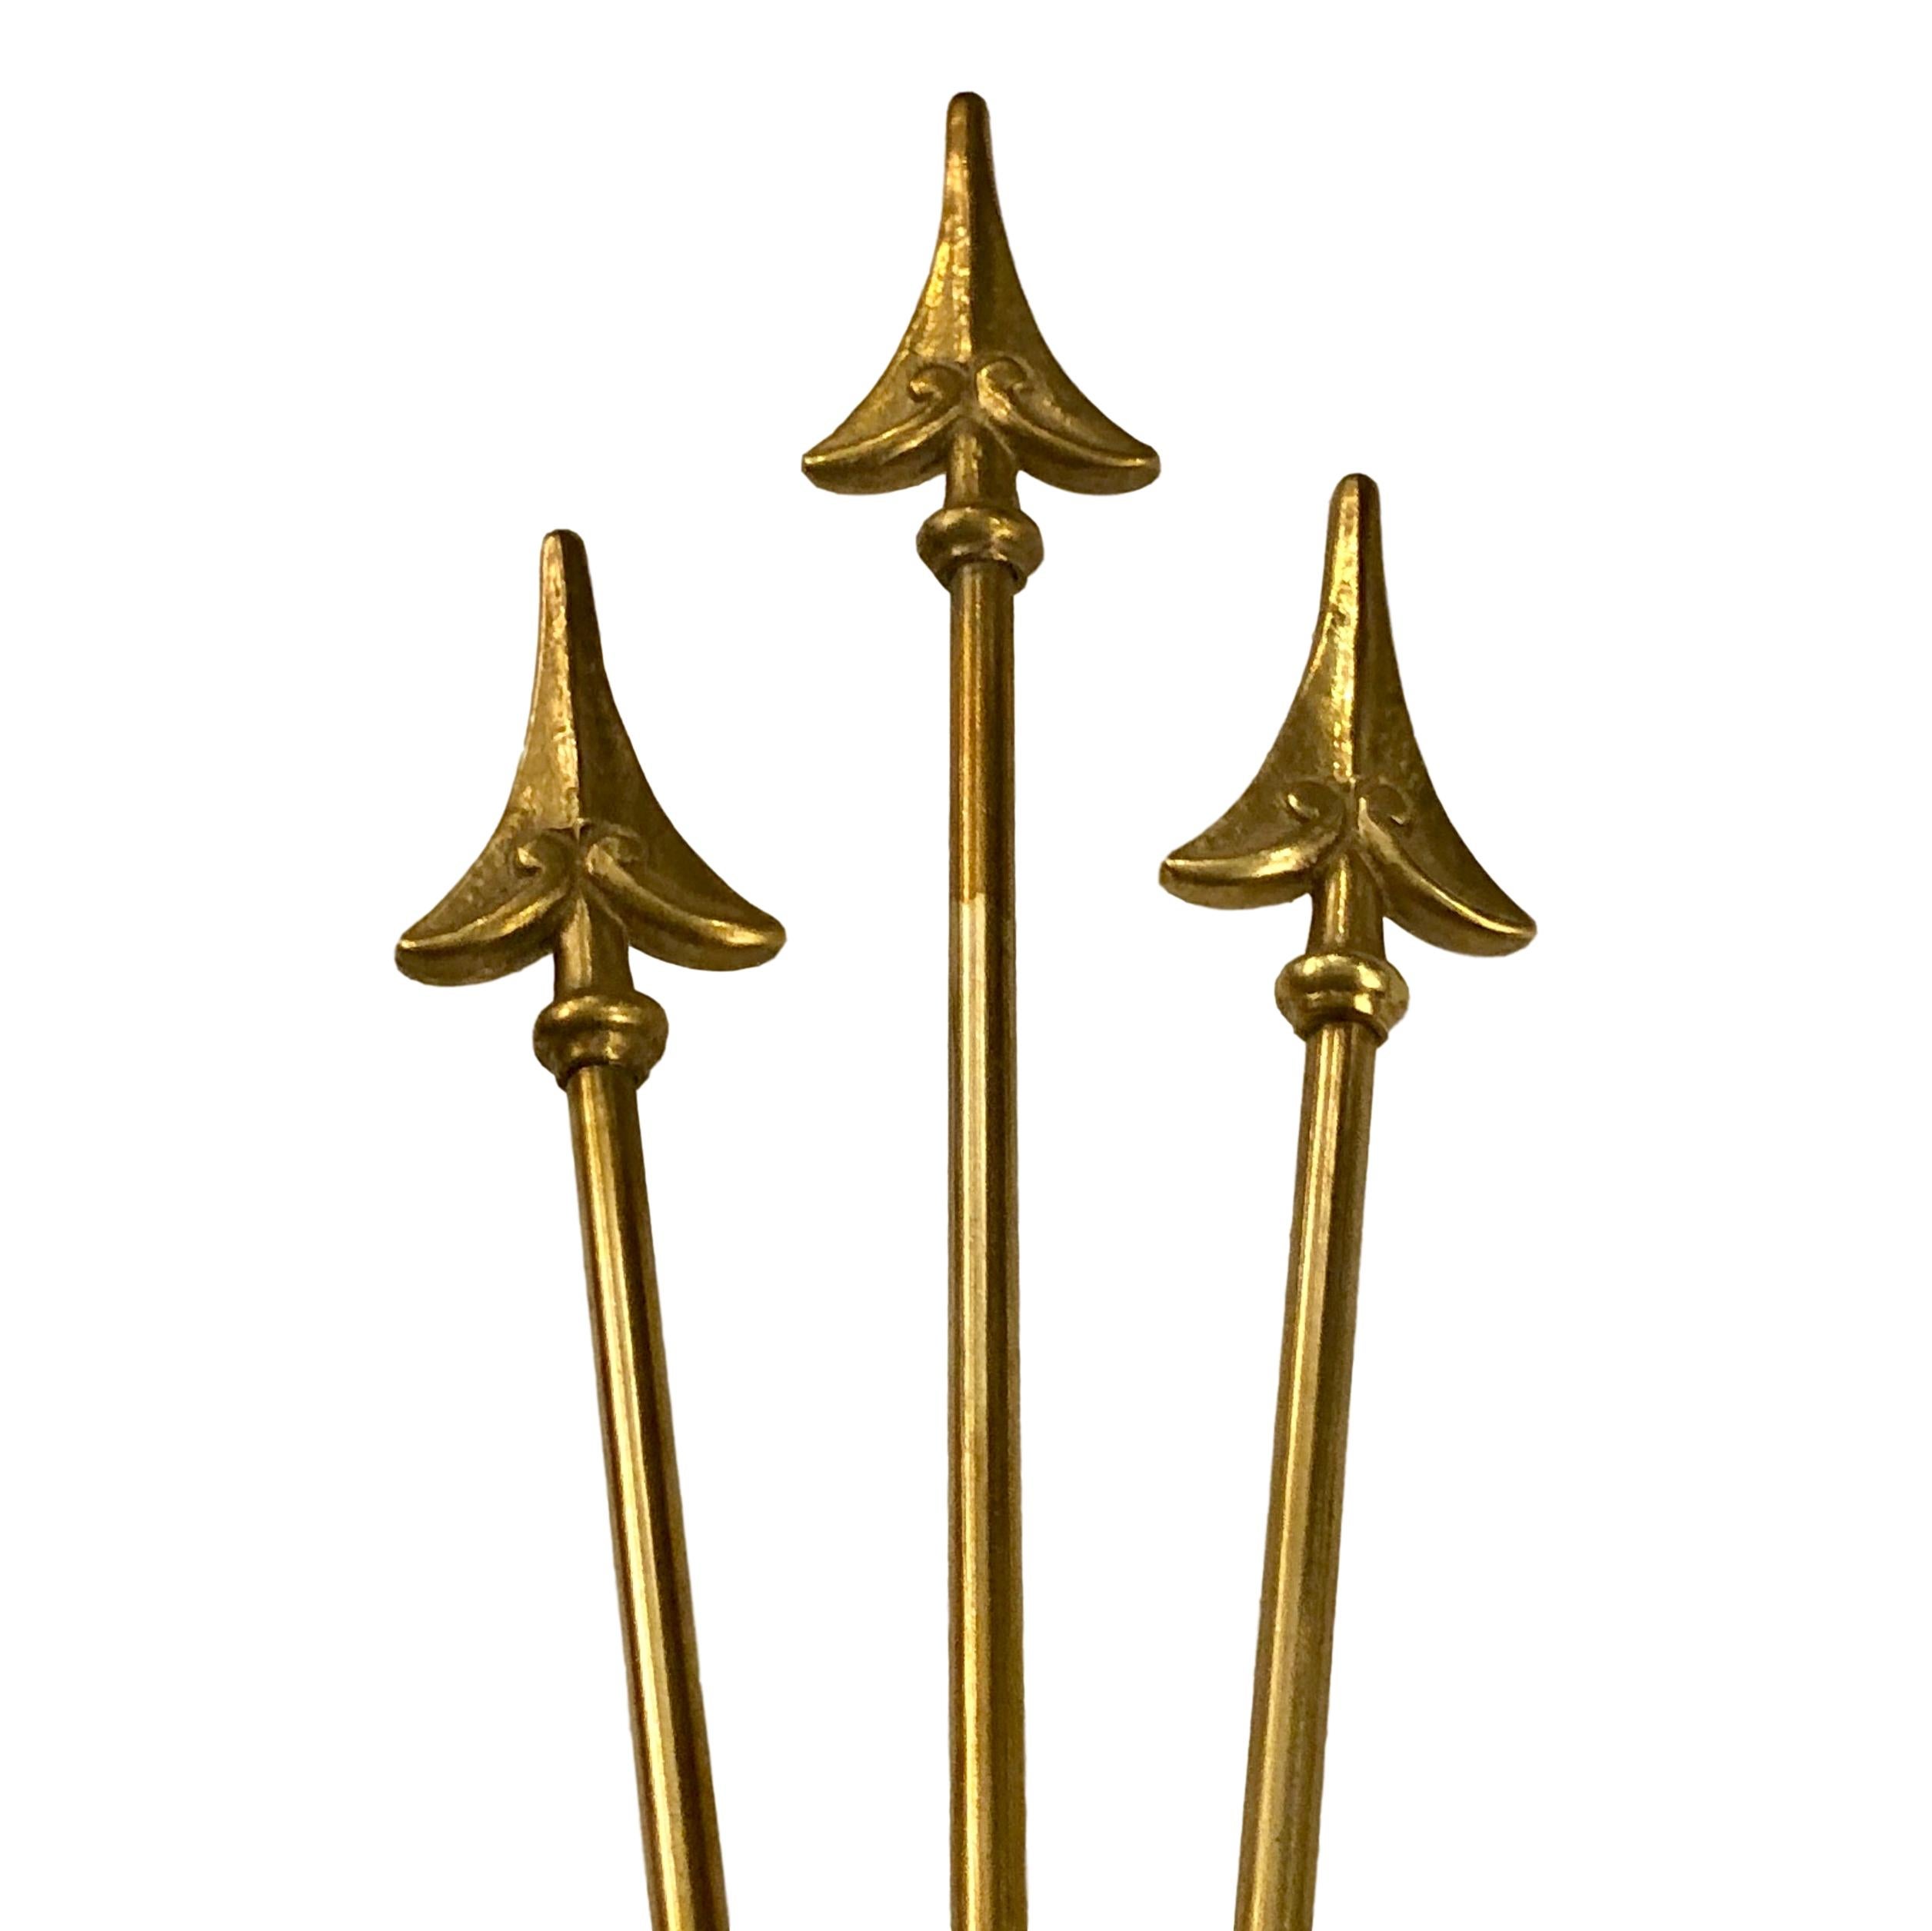 A pair of French circa 1940's painted and gilt metal Empire-style sconces with interior lights.

Measurements:
Height: 15